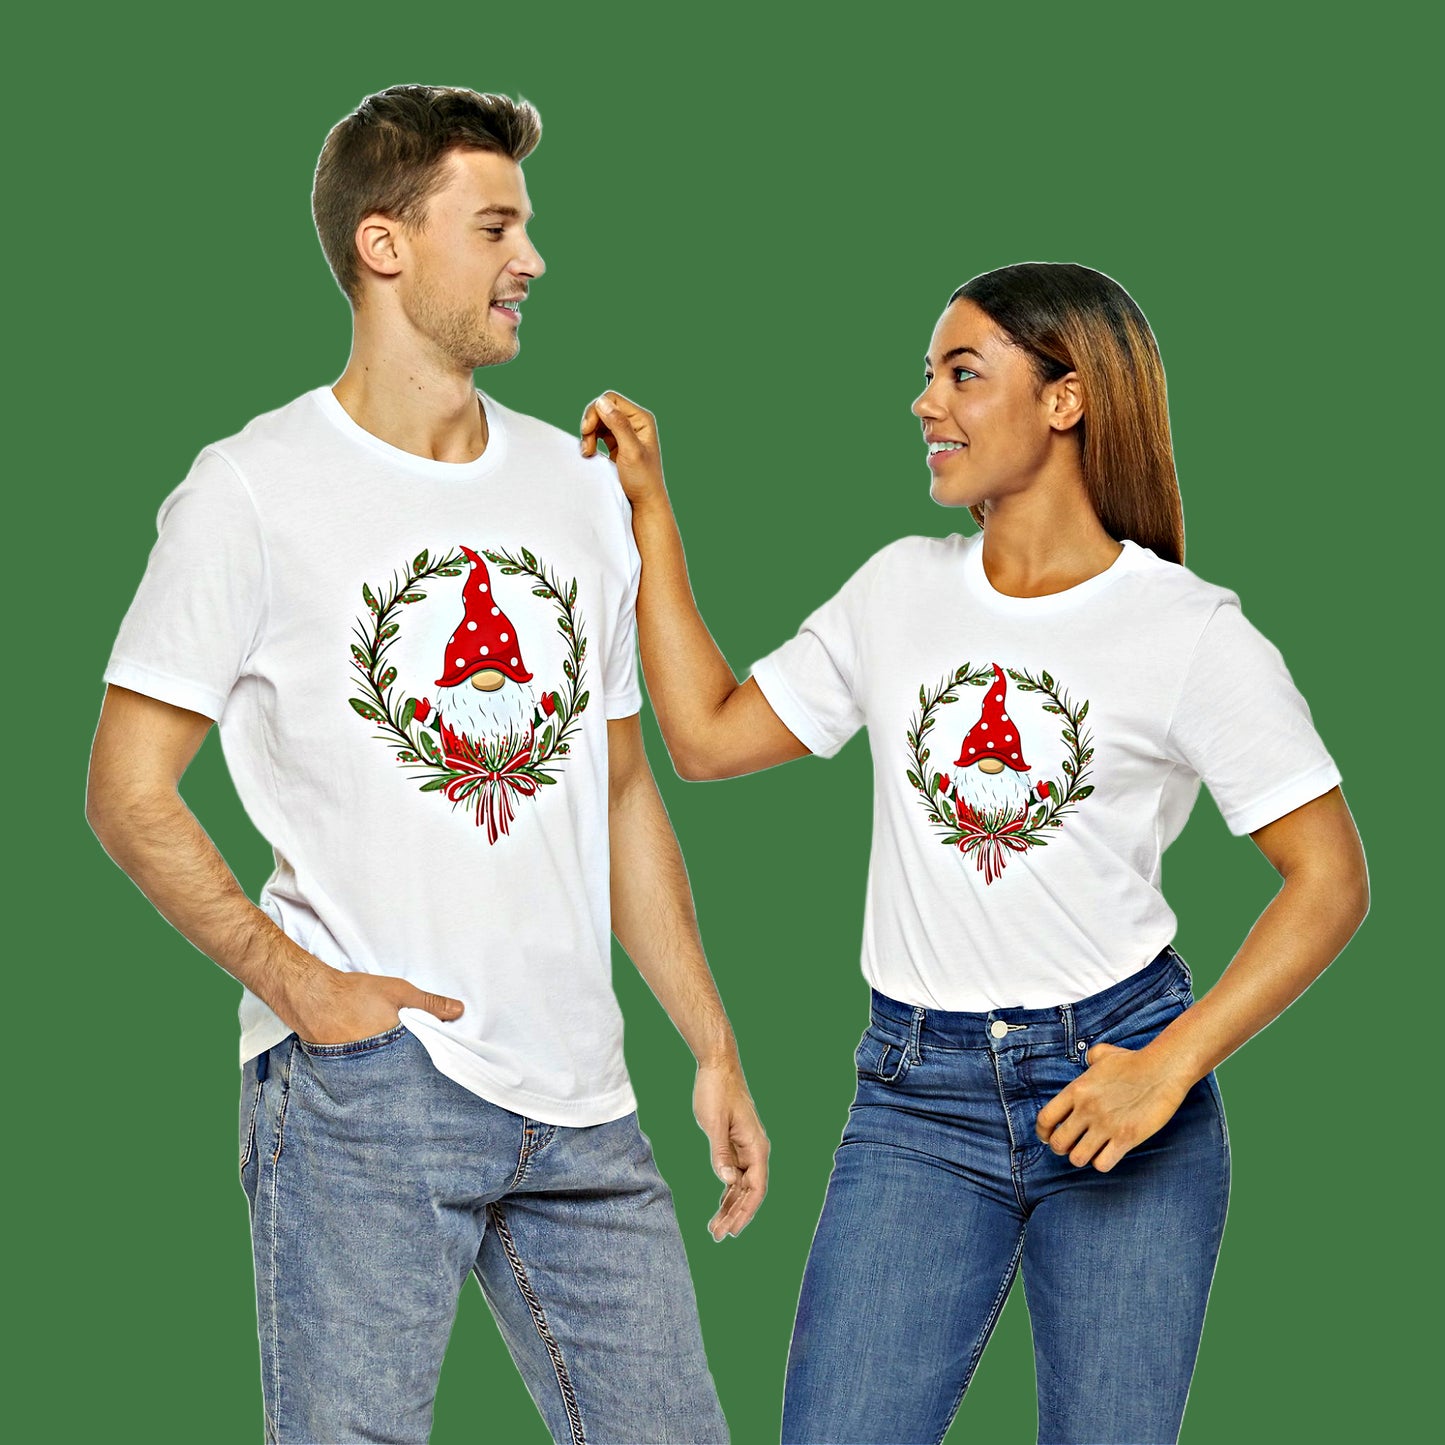 Man and Woman each wearing the White shirt